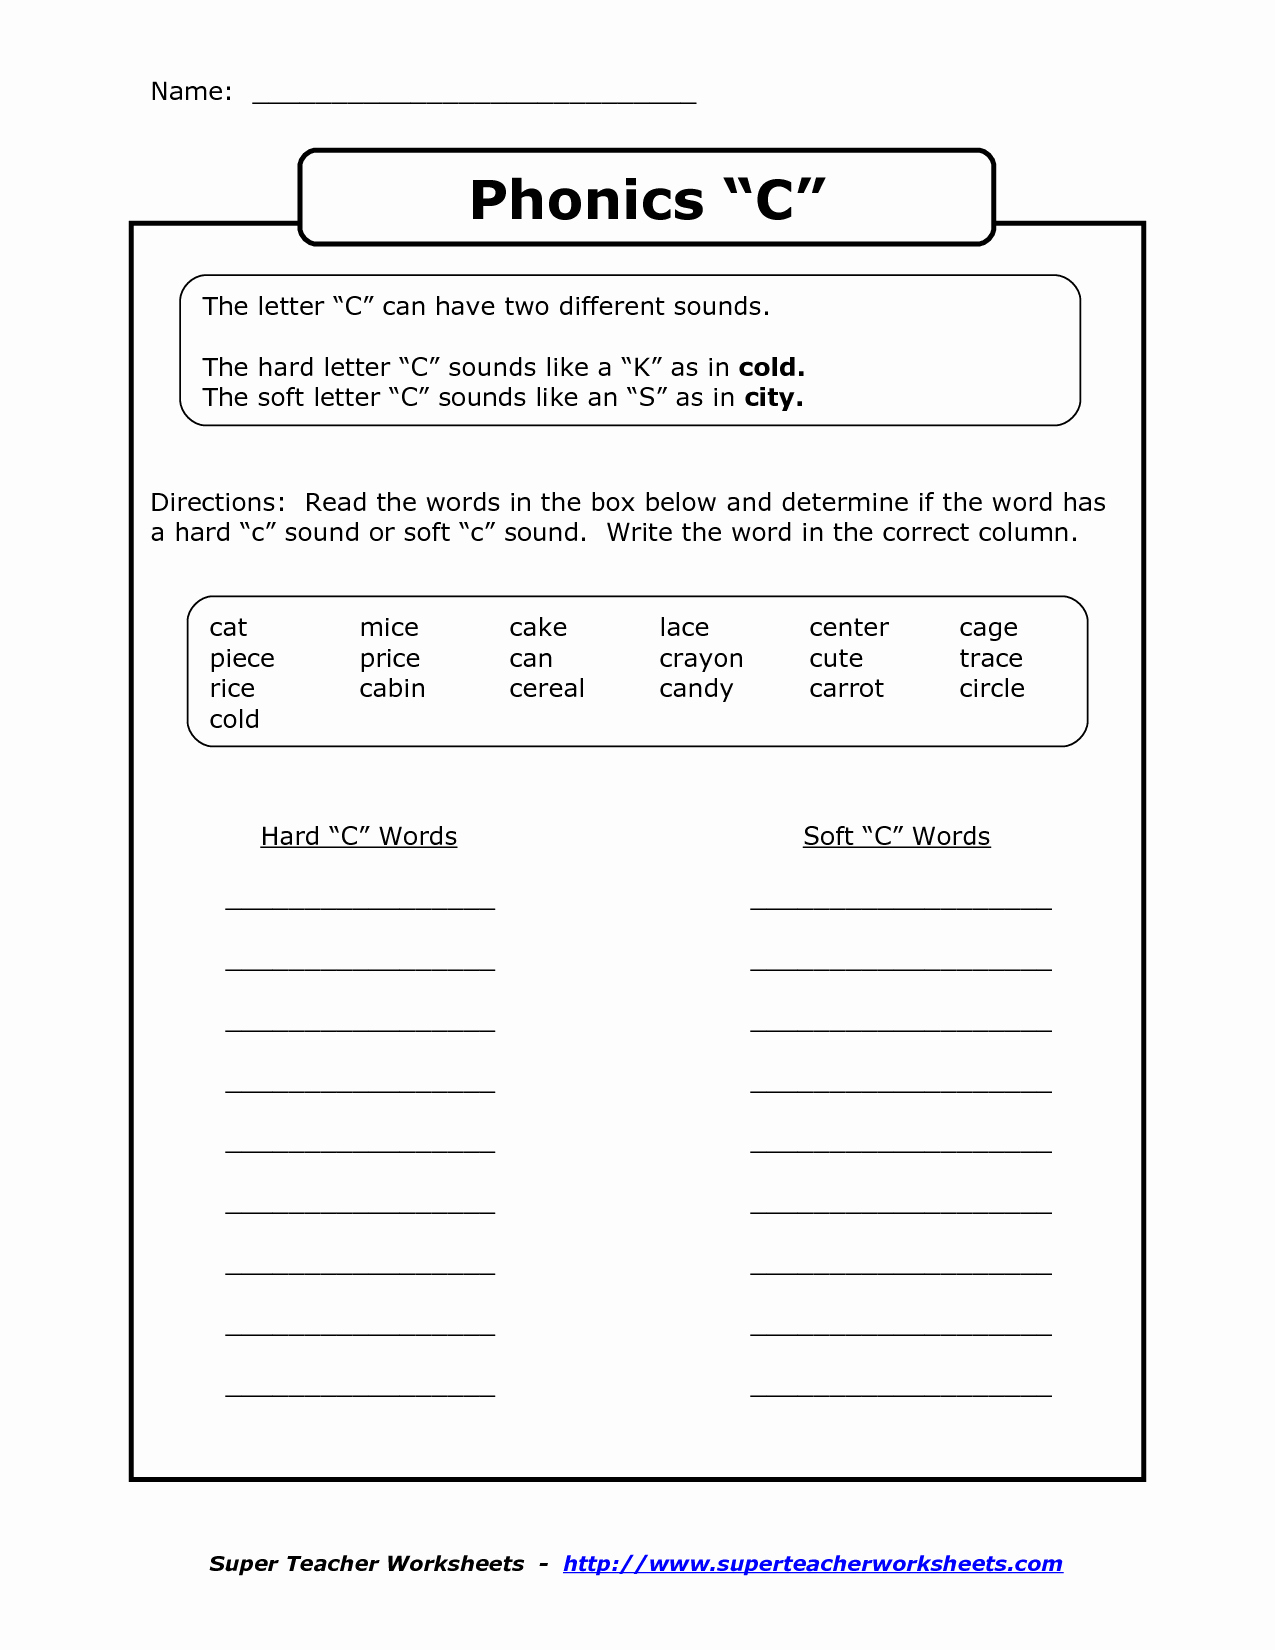 Soft C Words Worksheets Awesome 10 Download Phonics Letter C sound sound Download Phonics